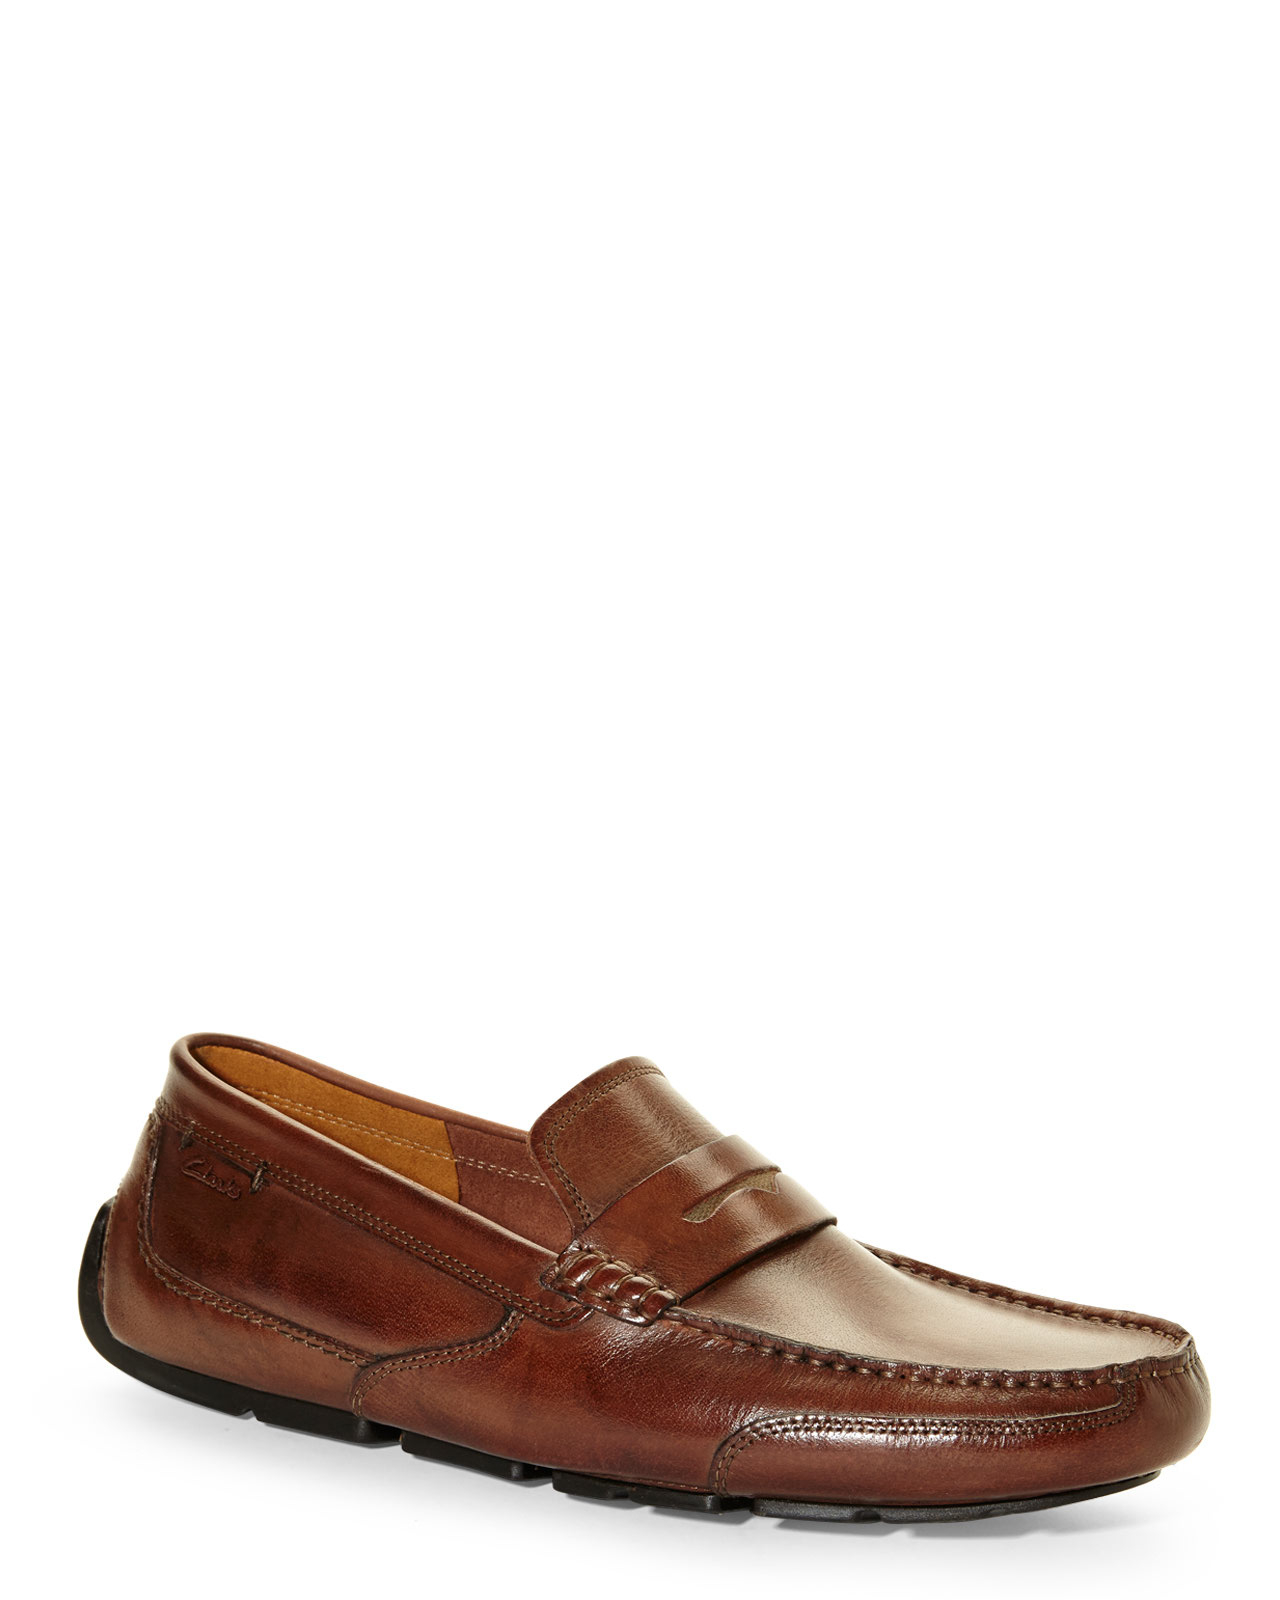 Lyst - Clarks Ashmont Way Penny Loafers in Brown for Men